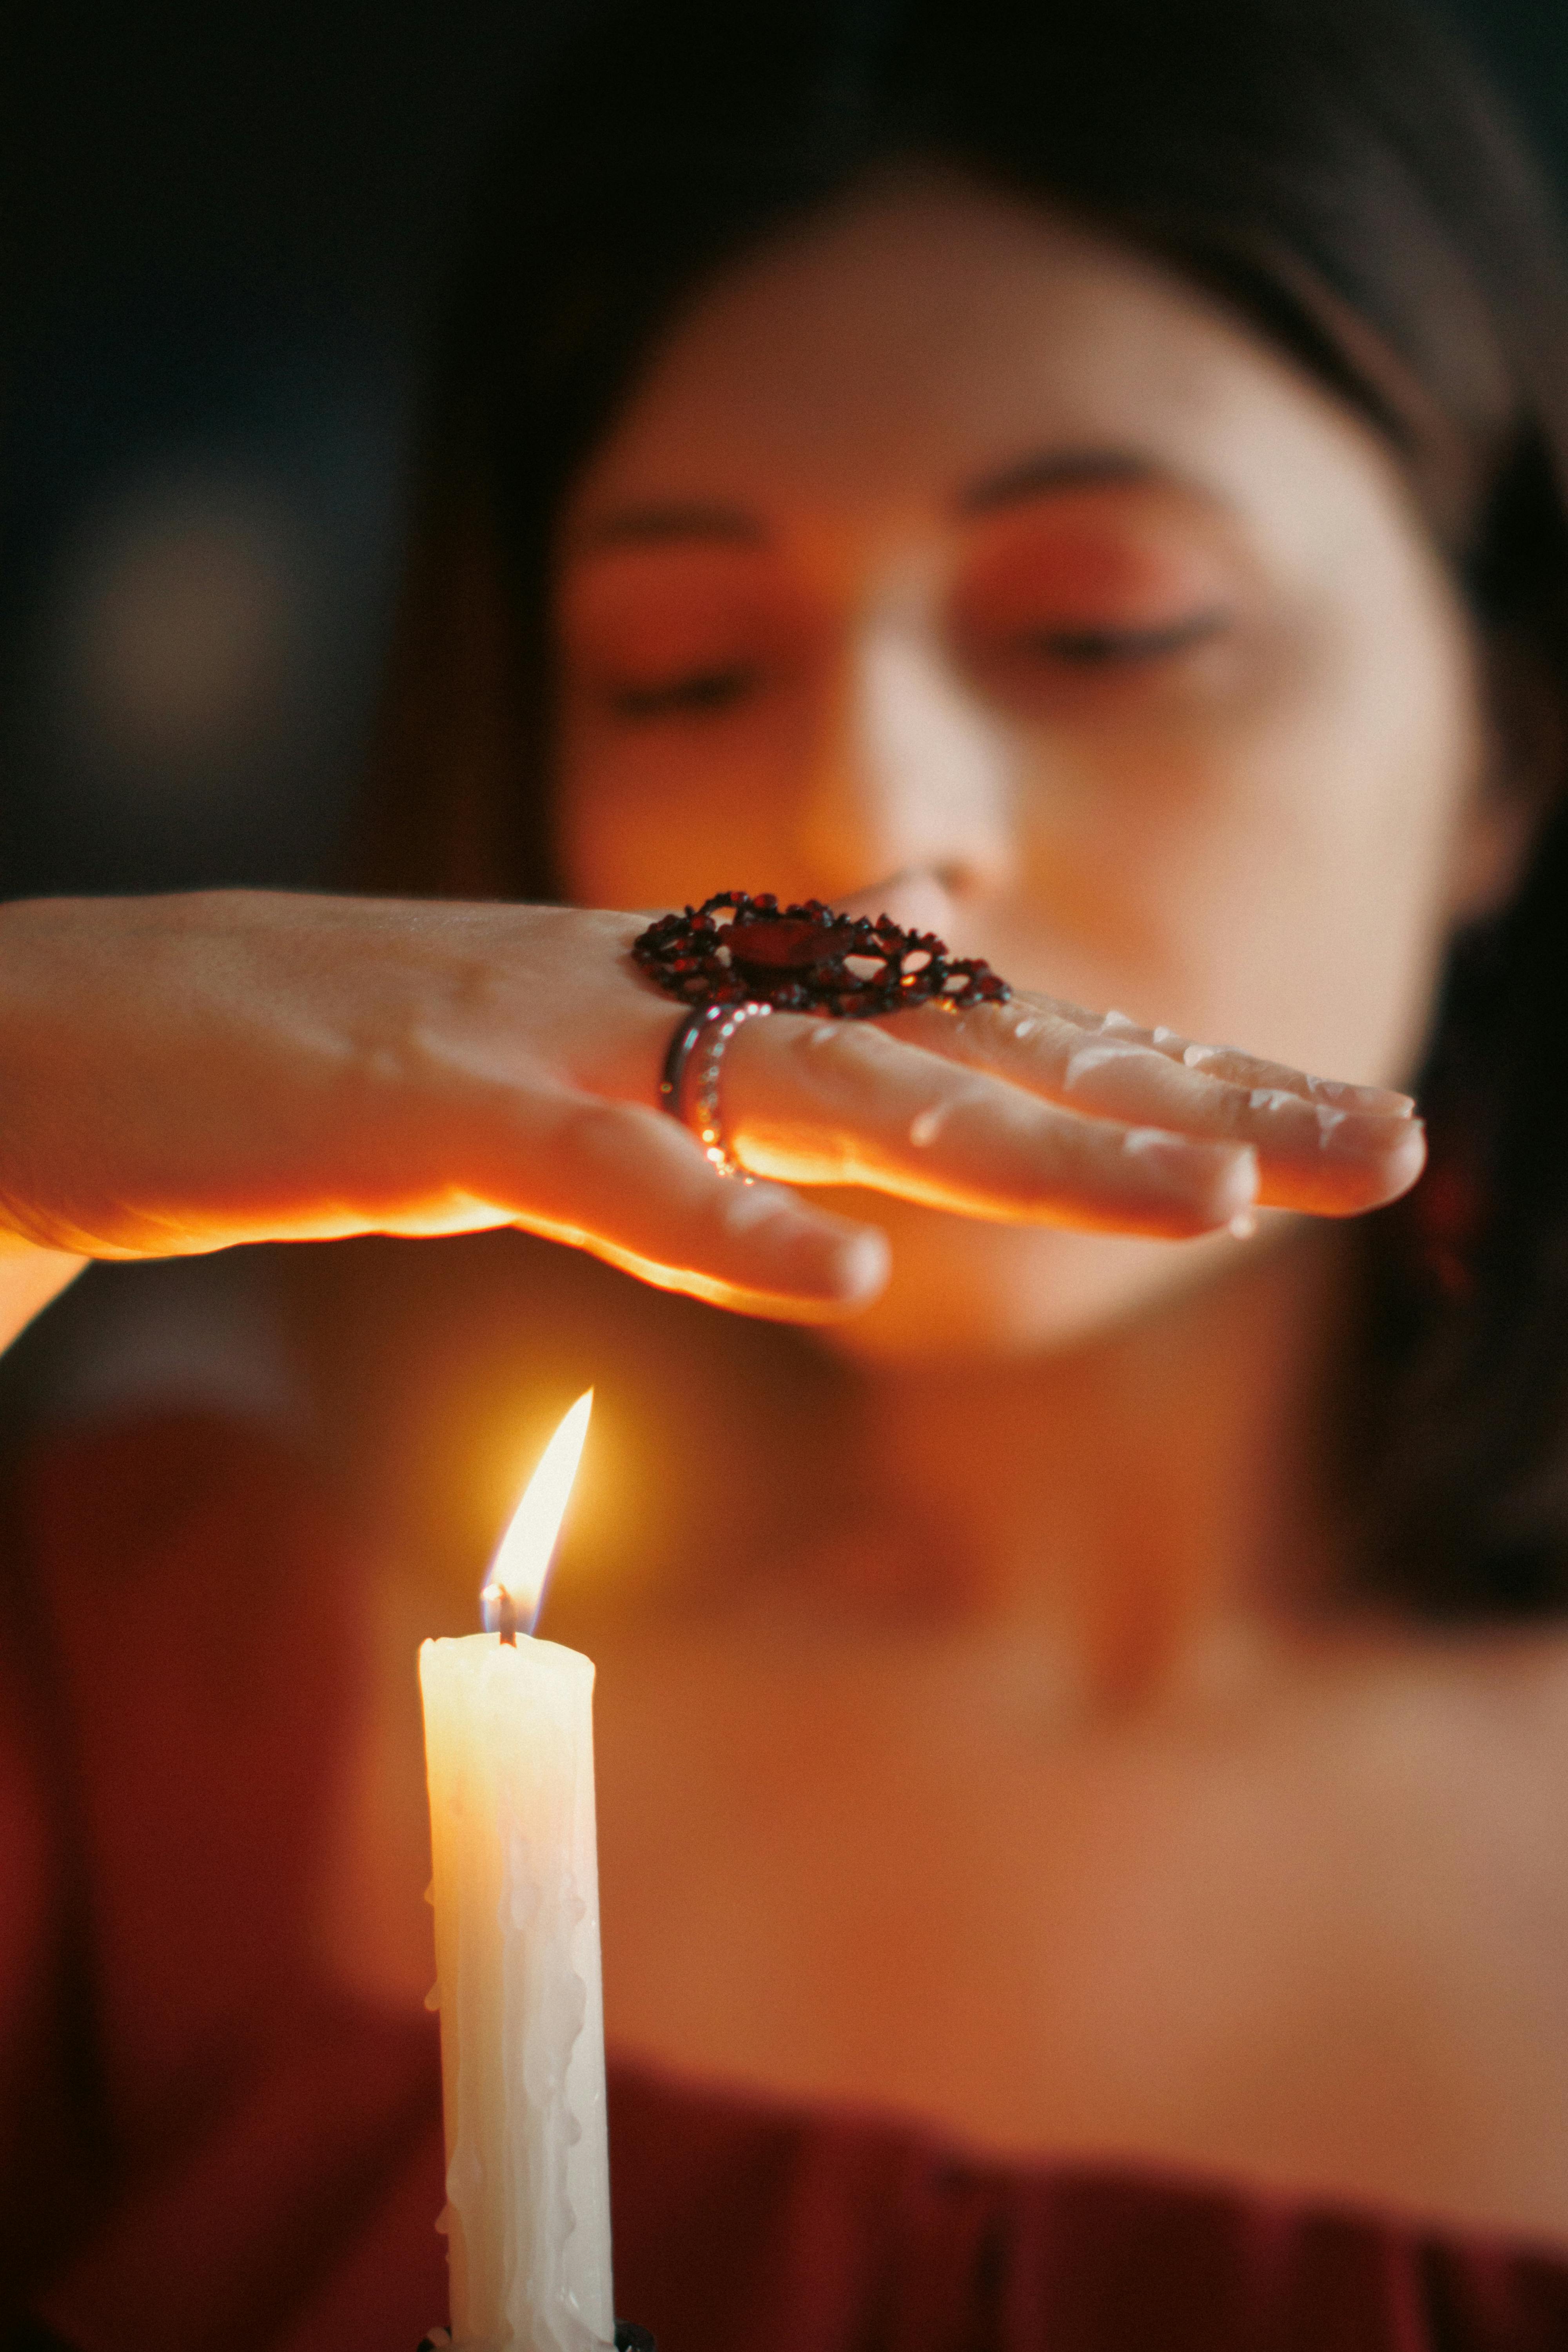 DIY wax candle making process. Woman lights decorative wax candle, close-up  of hands - Stock Image - Everypixel